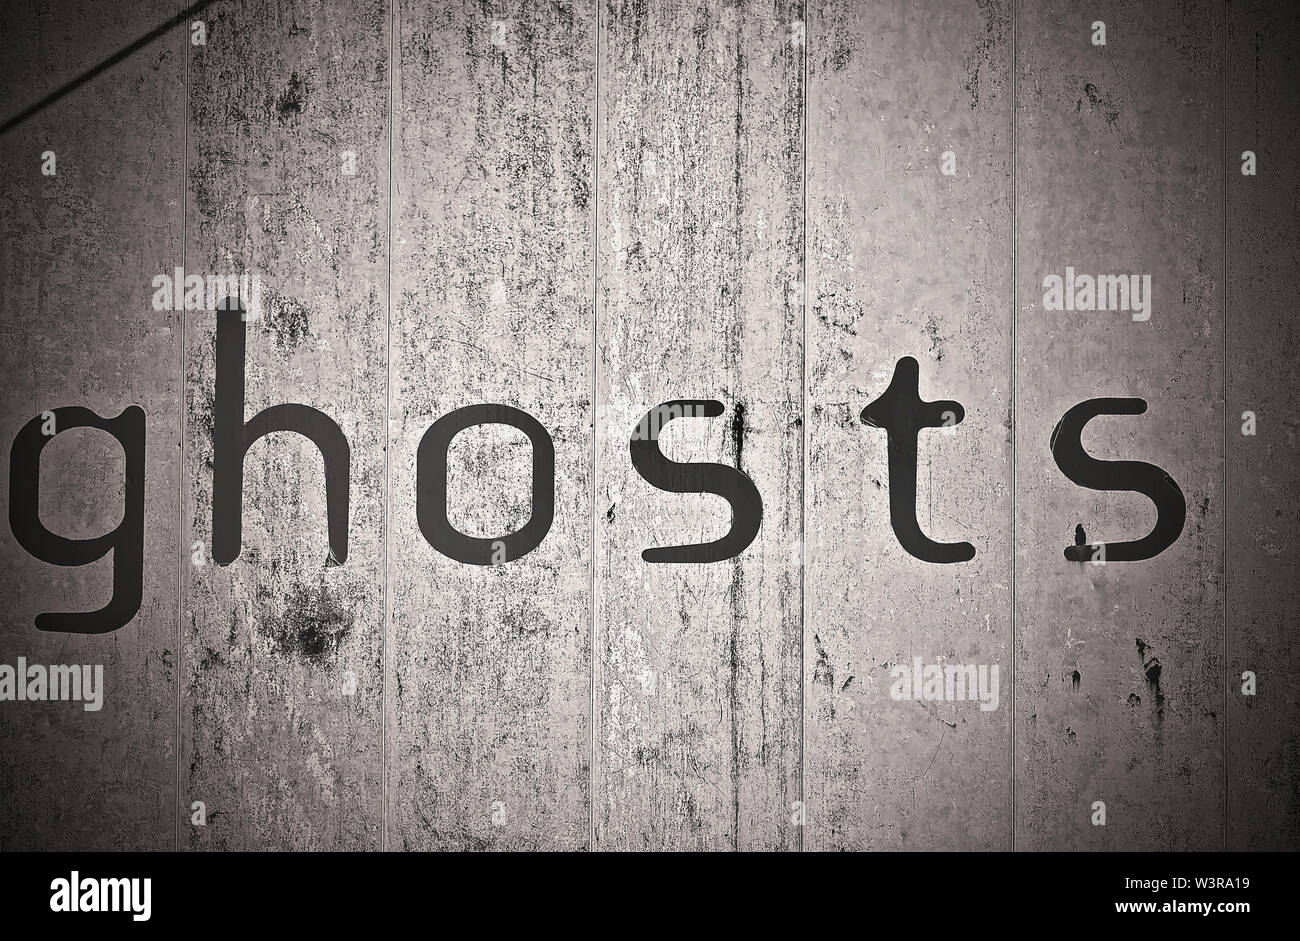 The word “ghosts” is painted on a wall, Sept. 13, 2015, in Memphis, Tennessee. Many locations in the city are said to be haunted. Stock Photo